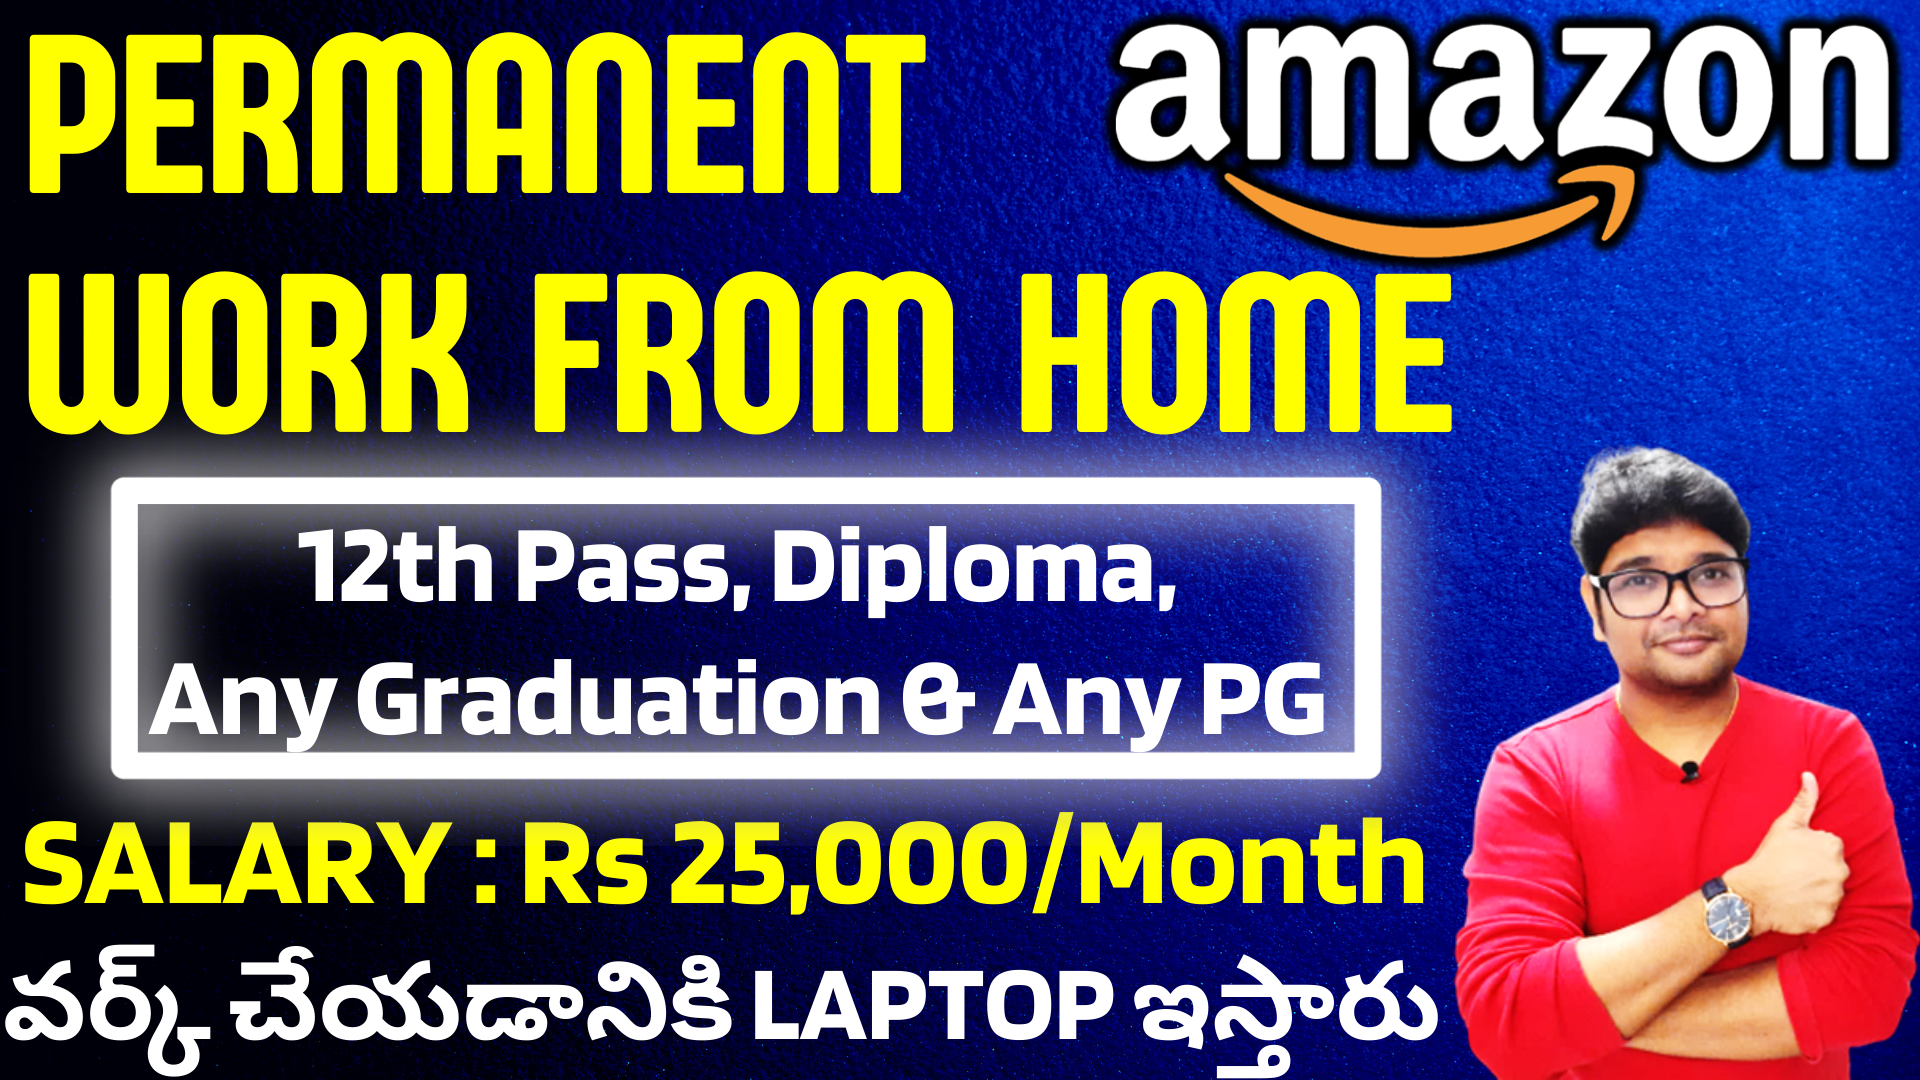 Work from Home jobs in Telugu Amazon Work from Home job Amazon jobs Latest jobs V the Techee